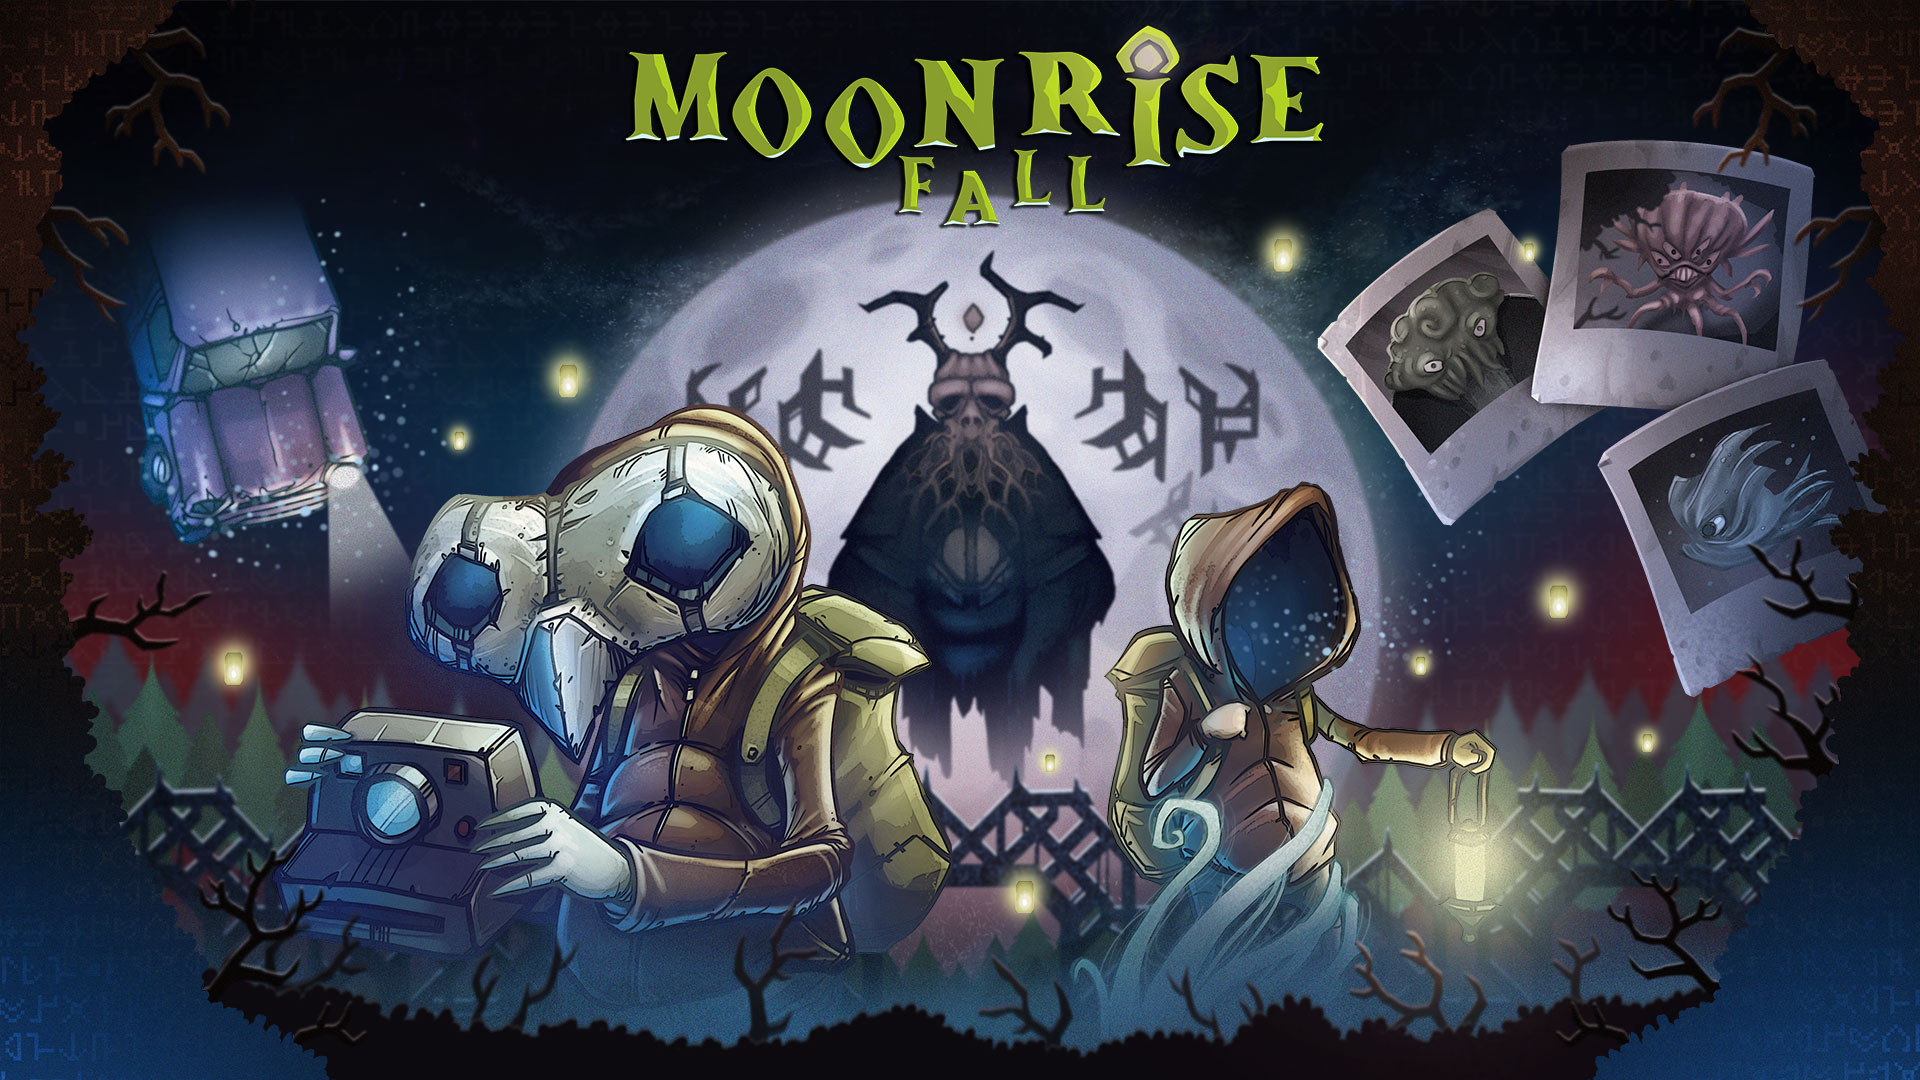 Creature Photographing Supernatural Puzzle Adventure Moonrise Fall rammer Xbox